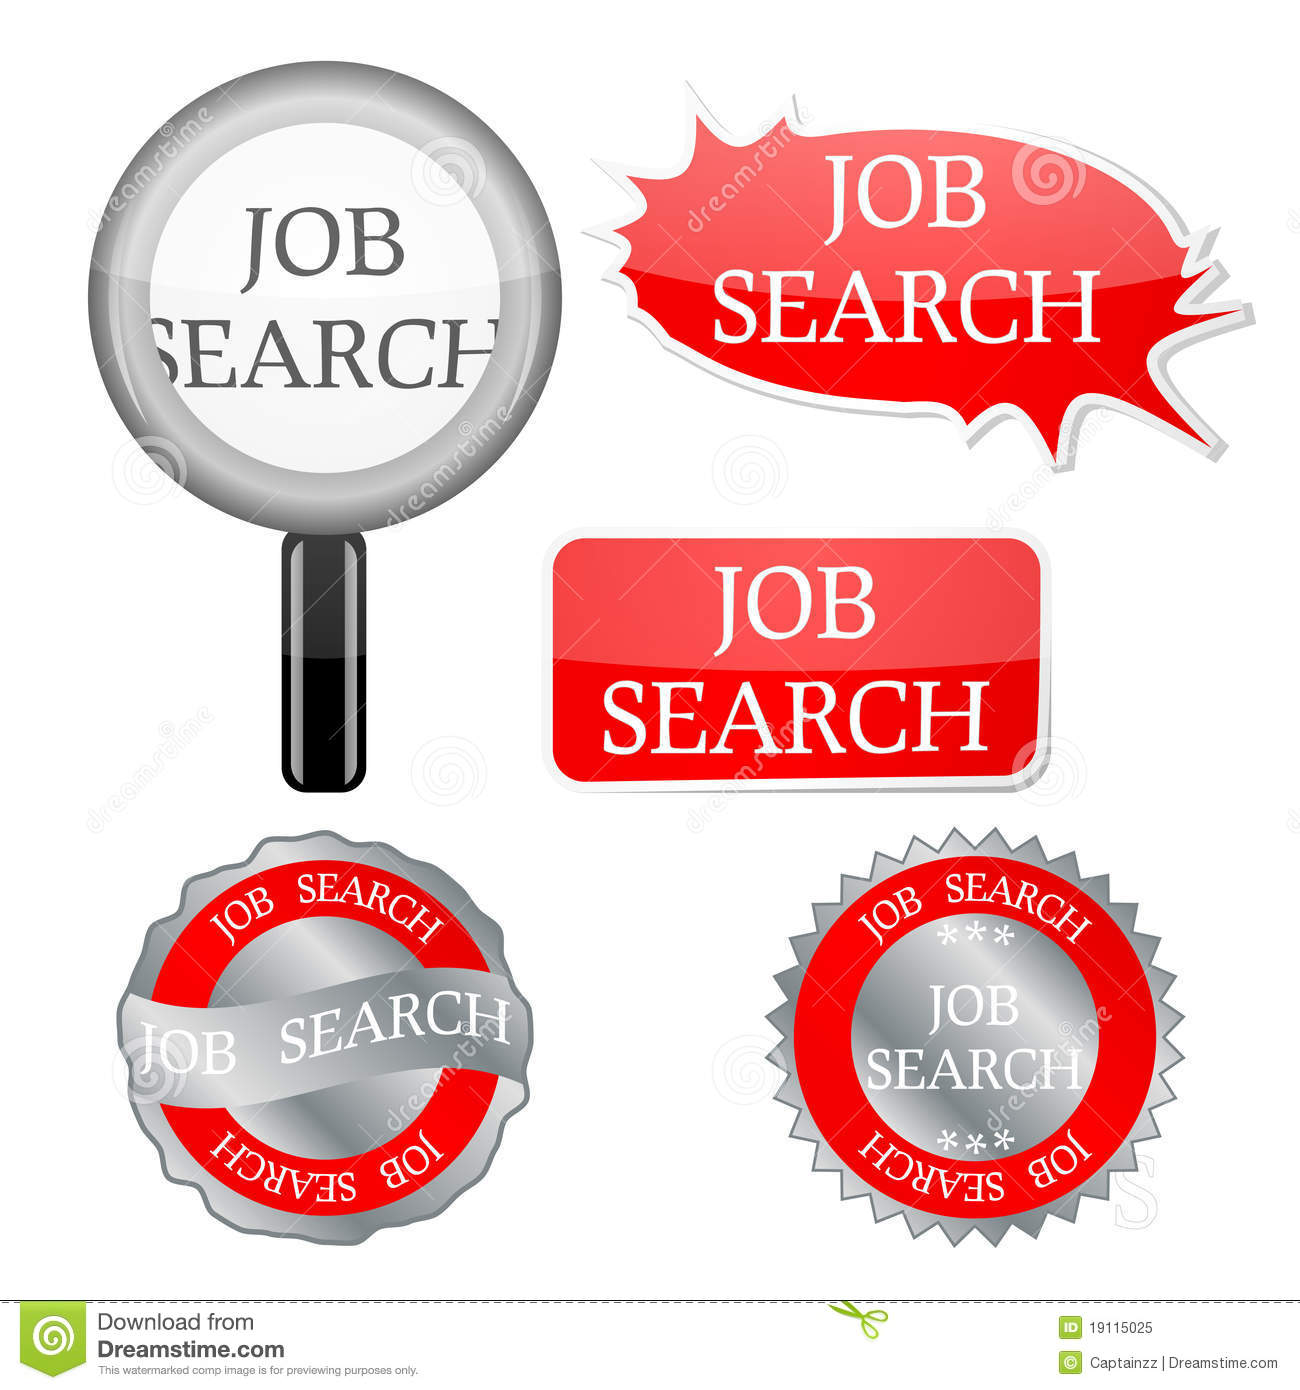 Royalty Free Images Job Search